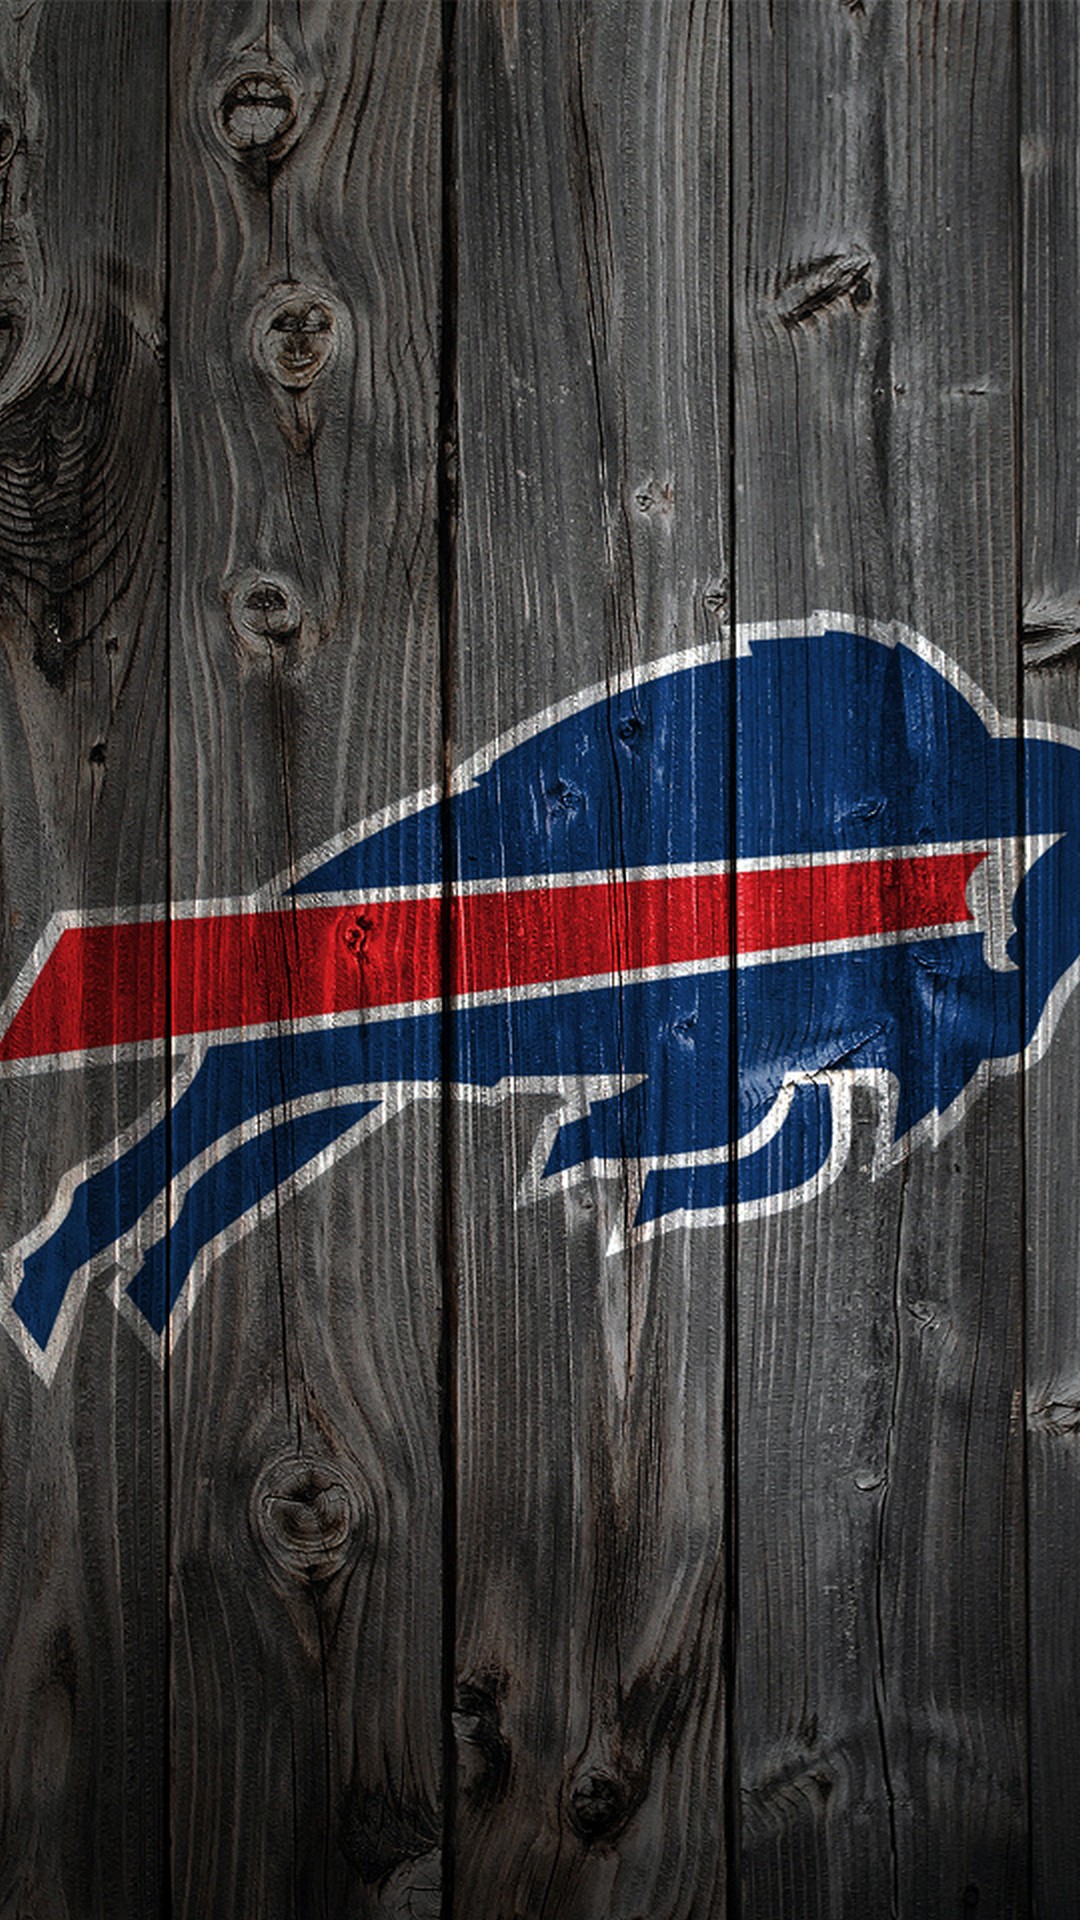 Buffalo Bills iPhone Screen Lock Wallpaper With high-resolution 1080X1920 pixel. Download and set as wallpaper for Apple iPhone X, XS Max, XR, 8, 7, 6, SE, iPad, Android